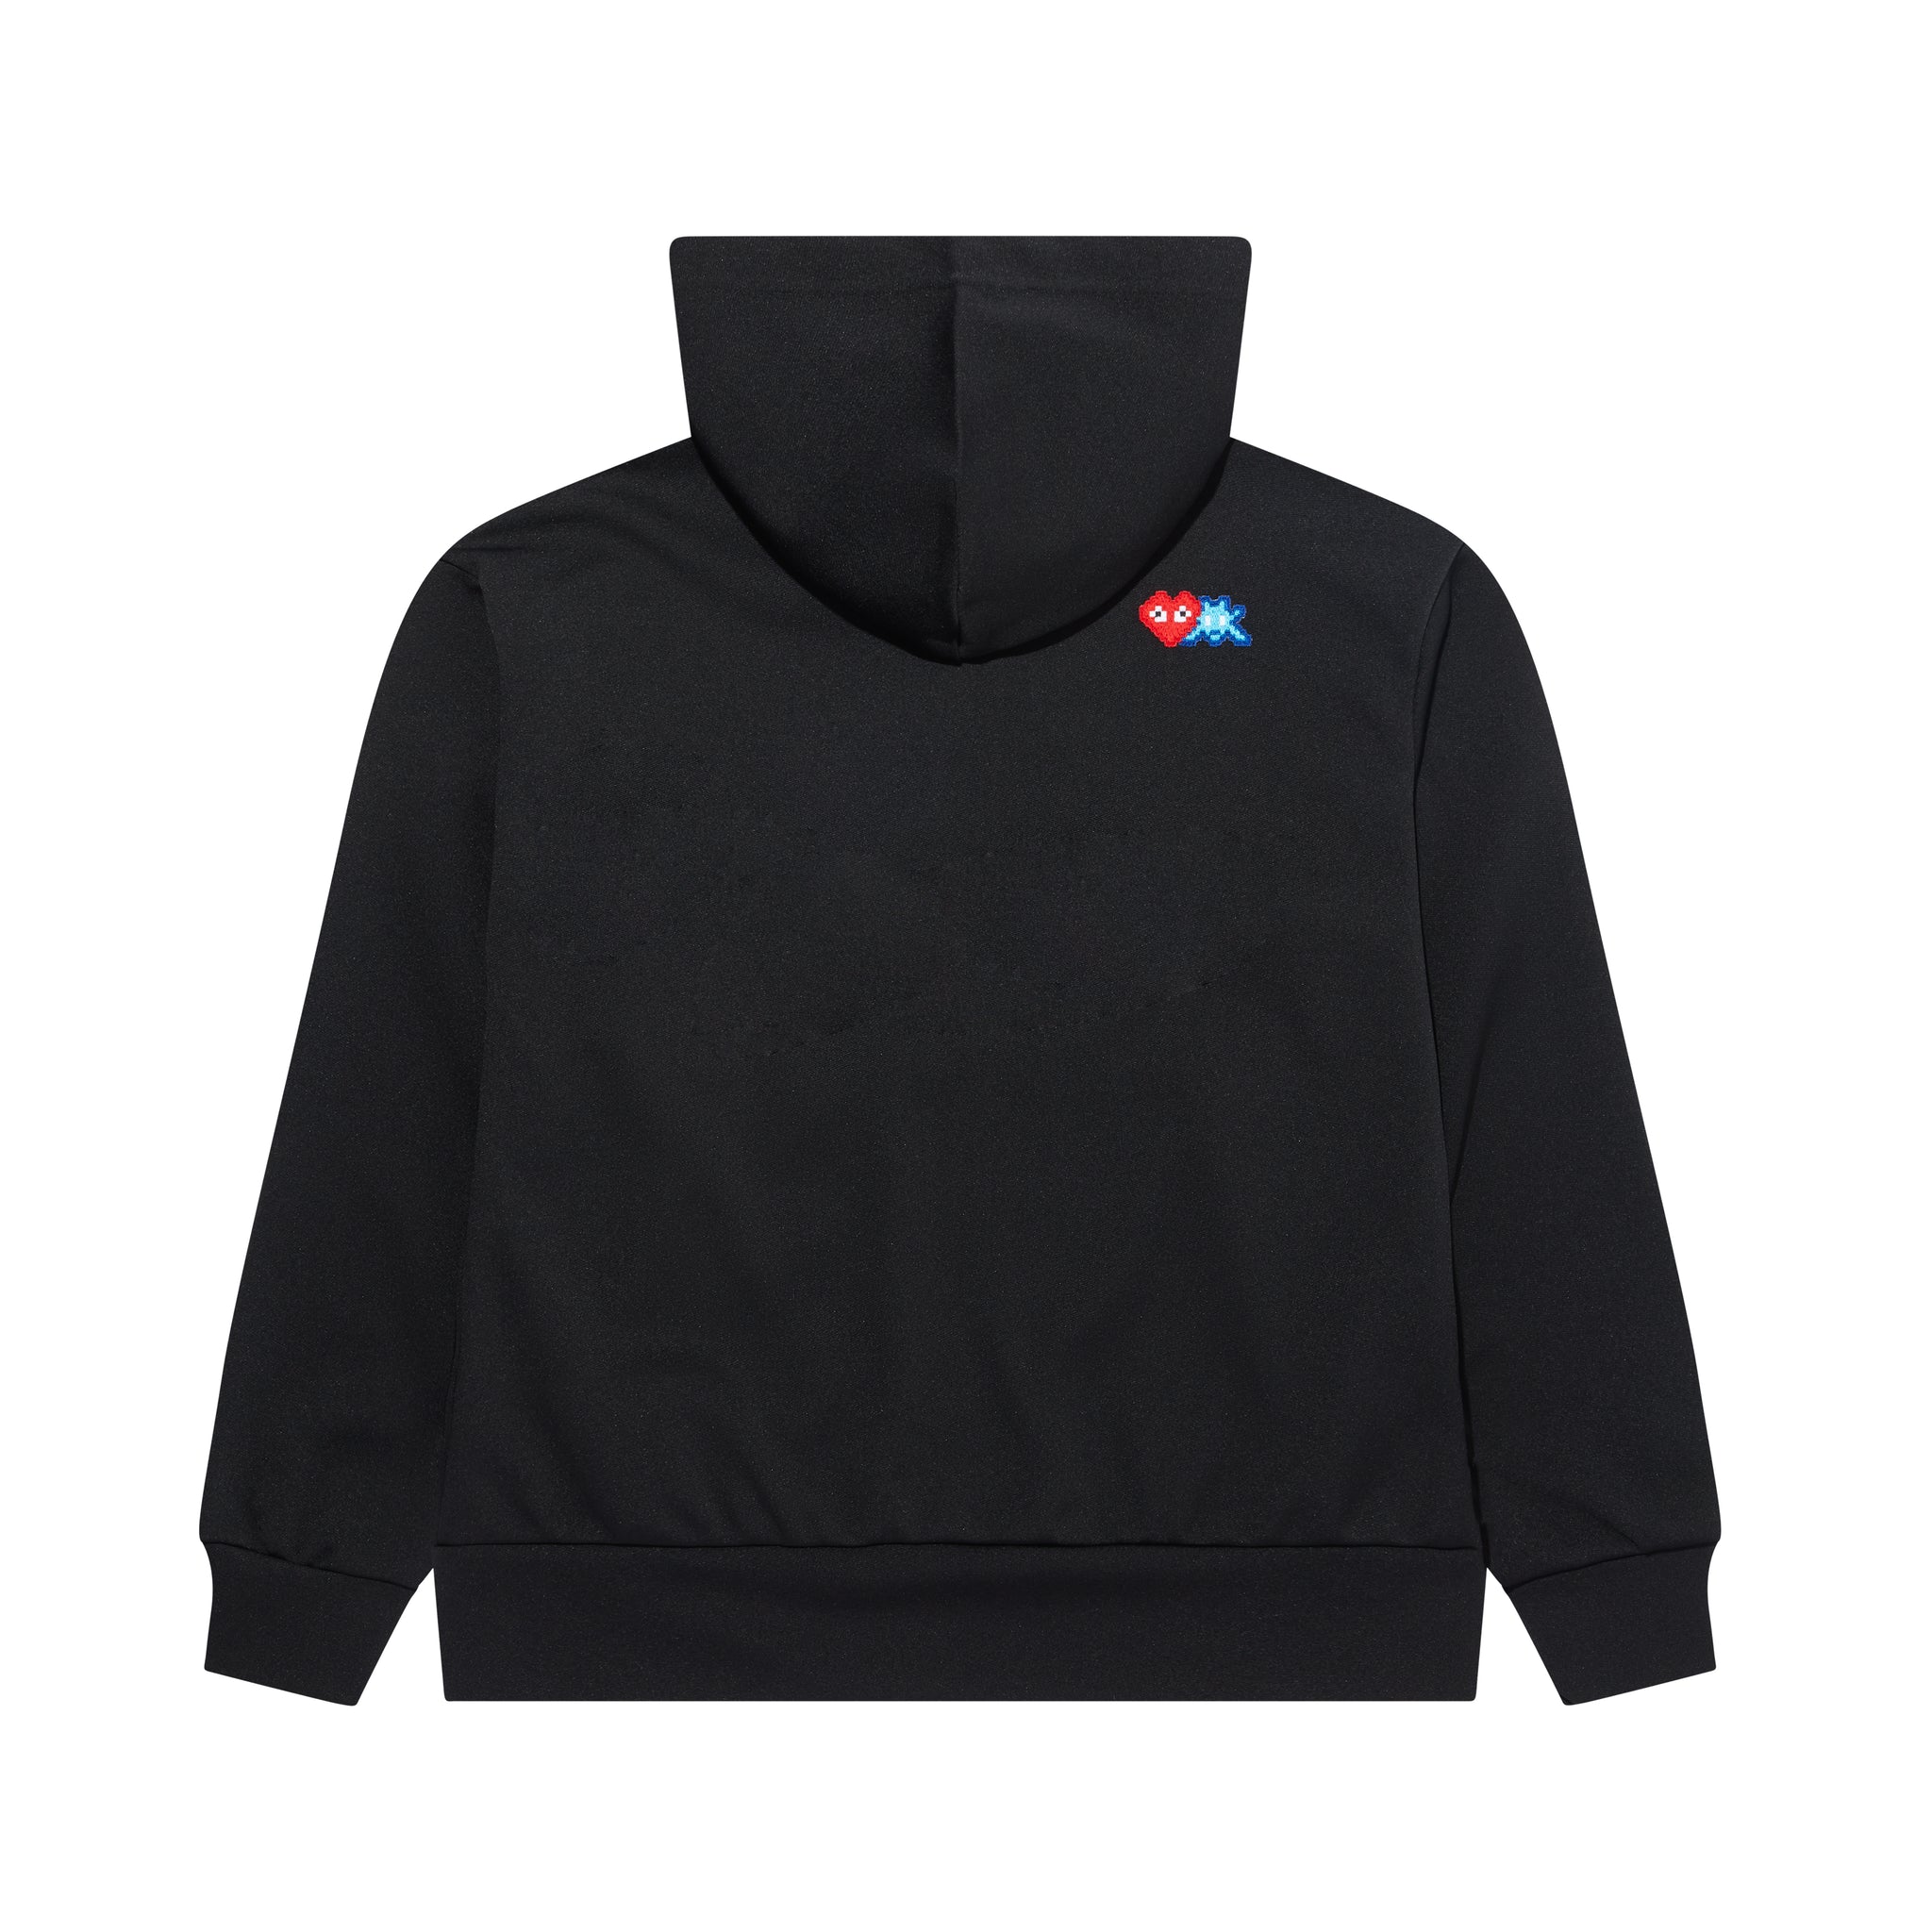 PLAY Zip Hooded Sweatshirt with Red Invader Heart and Blue Emblem (Black)